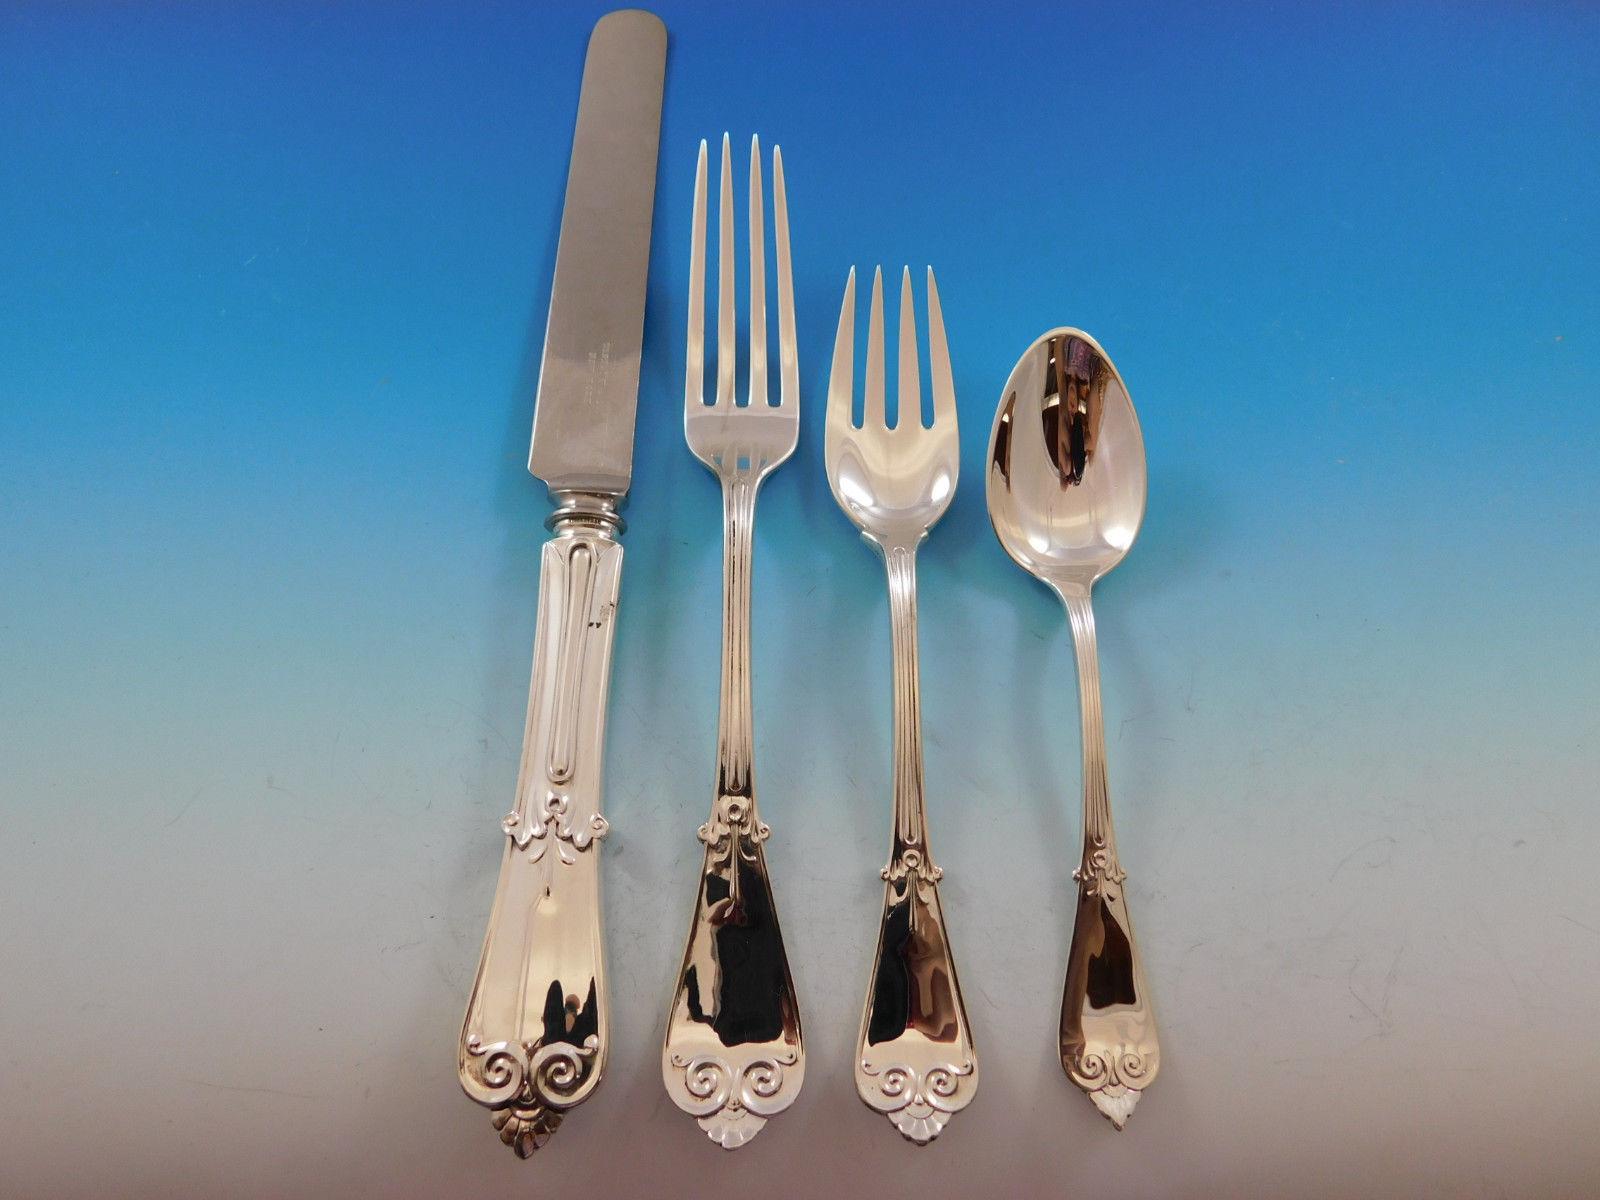 Dinner size Beekman by Tiffany & Co. sterling silver flatware set - 63 pieces. This set includes:

12 large banquet size knives, 10 1/2